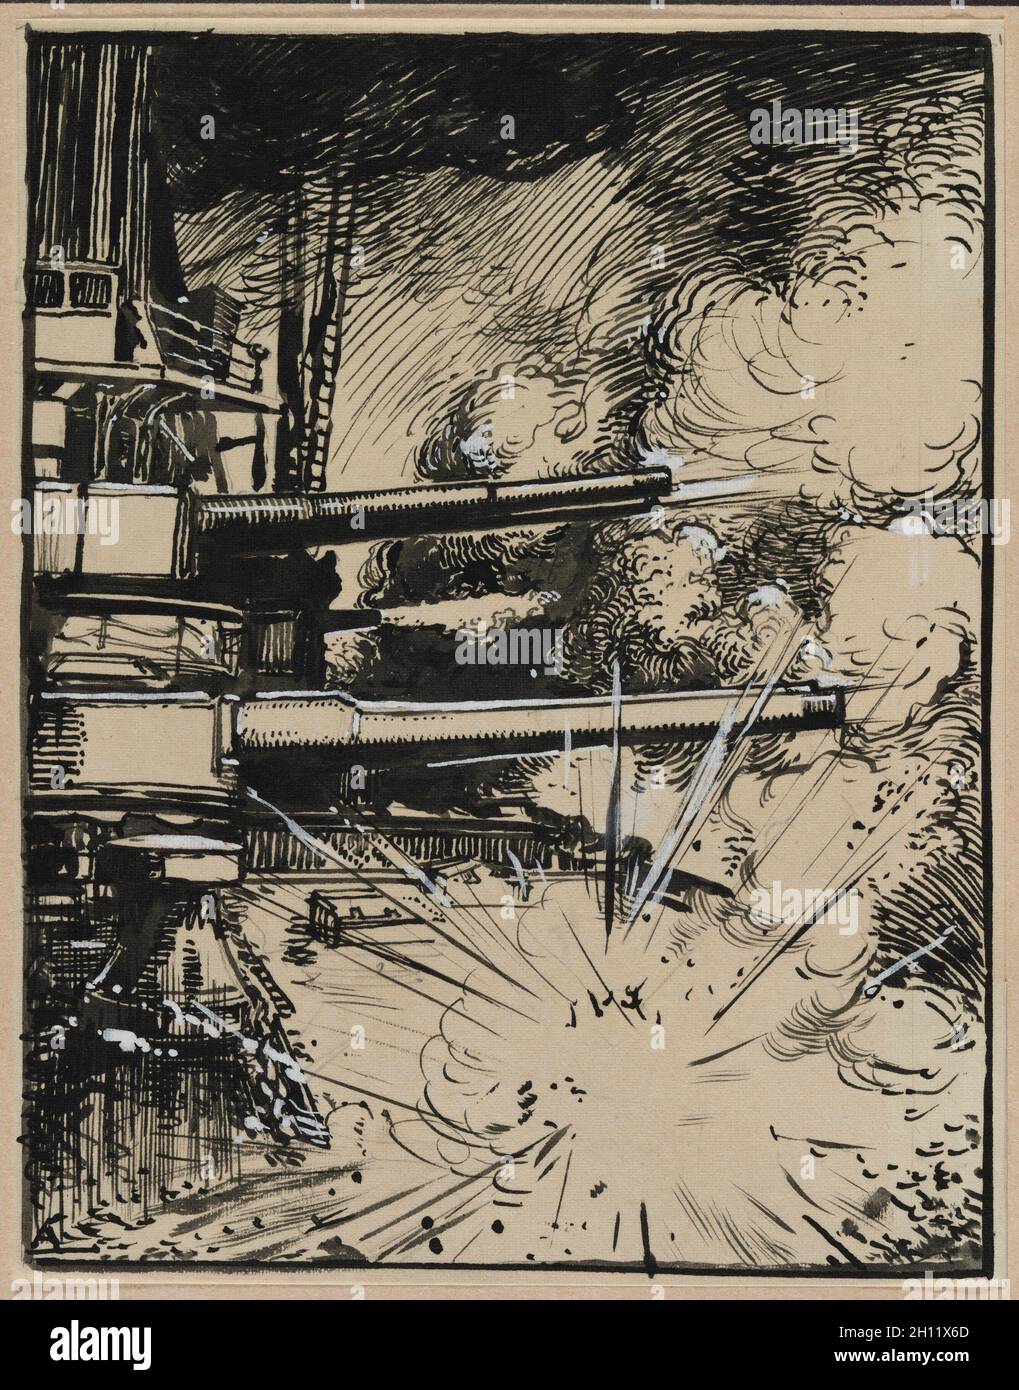 Bombe explosant sur un cuirasse aux canons braques, 1914. Auguste Louis Lepère (French, 1849-1918). Brush and black ink over pencil with white highlights; Stock Photo